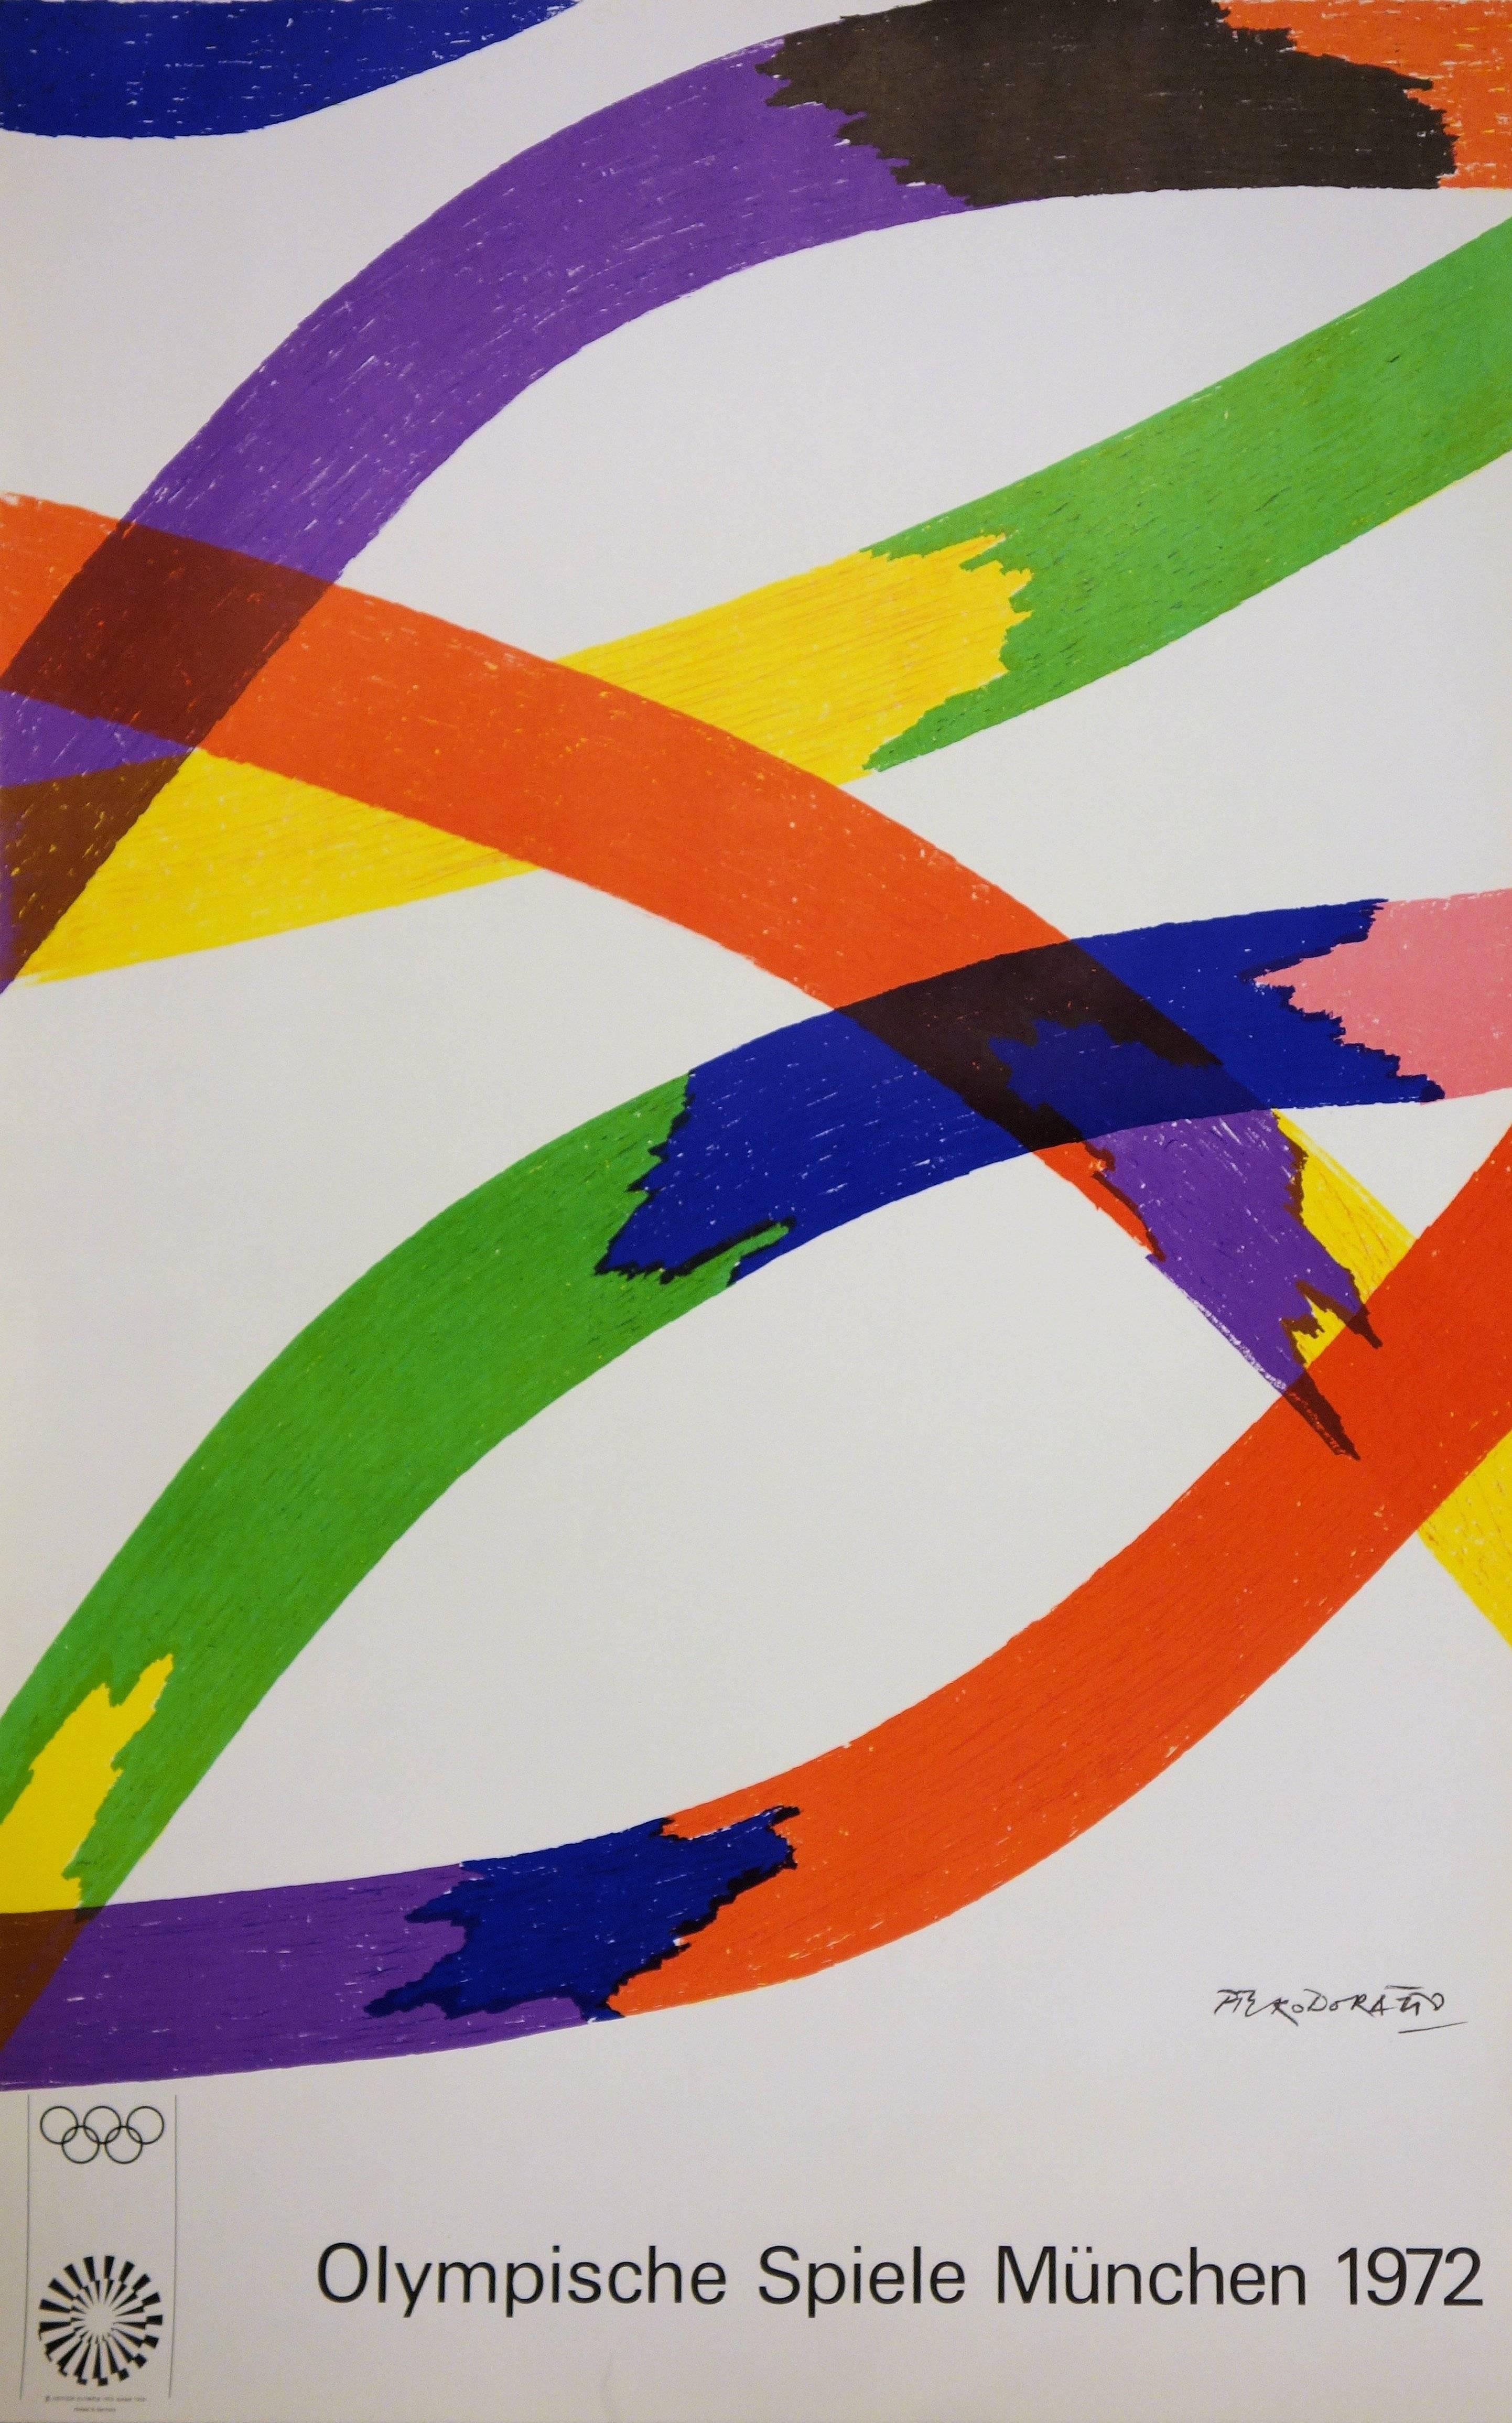 Piero Dorazio Abstract Print - Colored Ribbons - Lithograph (Olympic Games Munich 1972)